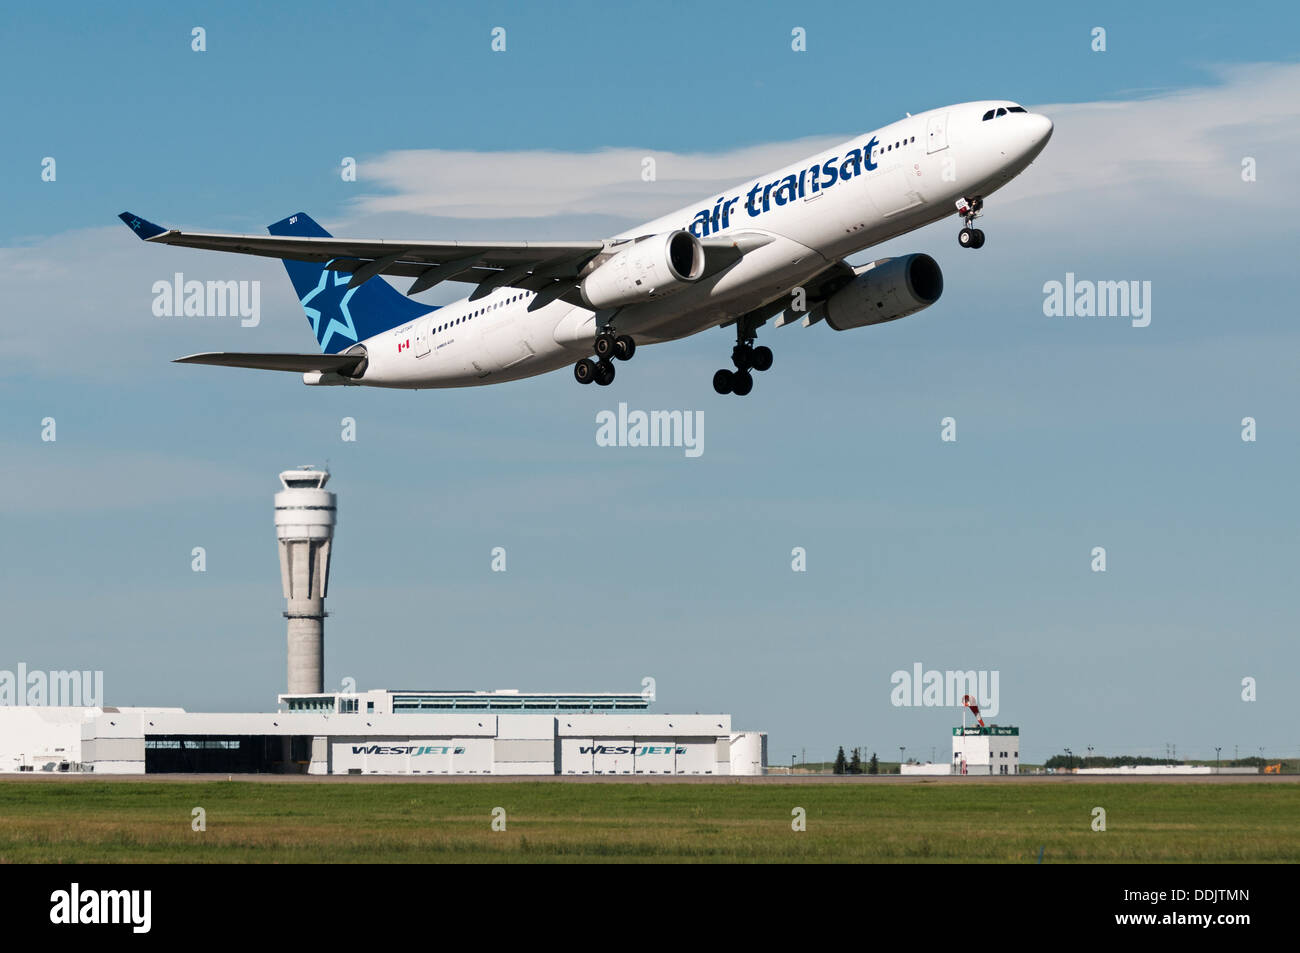 An Air Transat Airbus A330 wide body jetliner takes off from Calgary International Airport, airport buildings in the background. Stock Photo